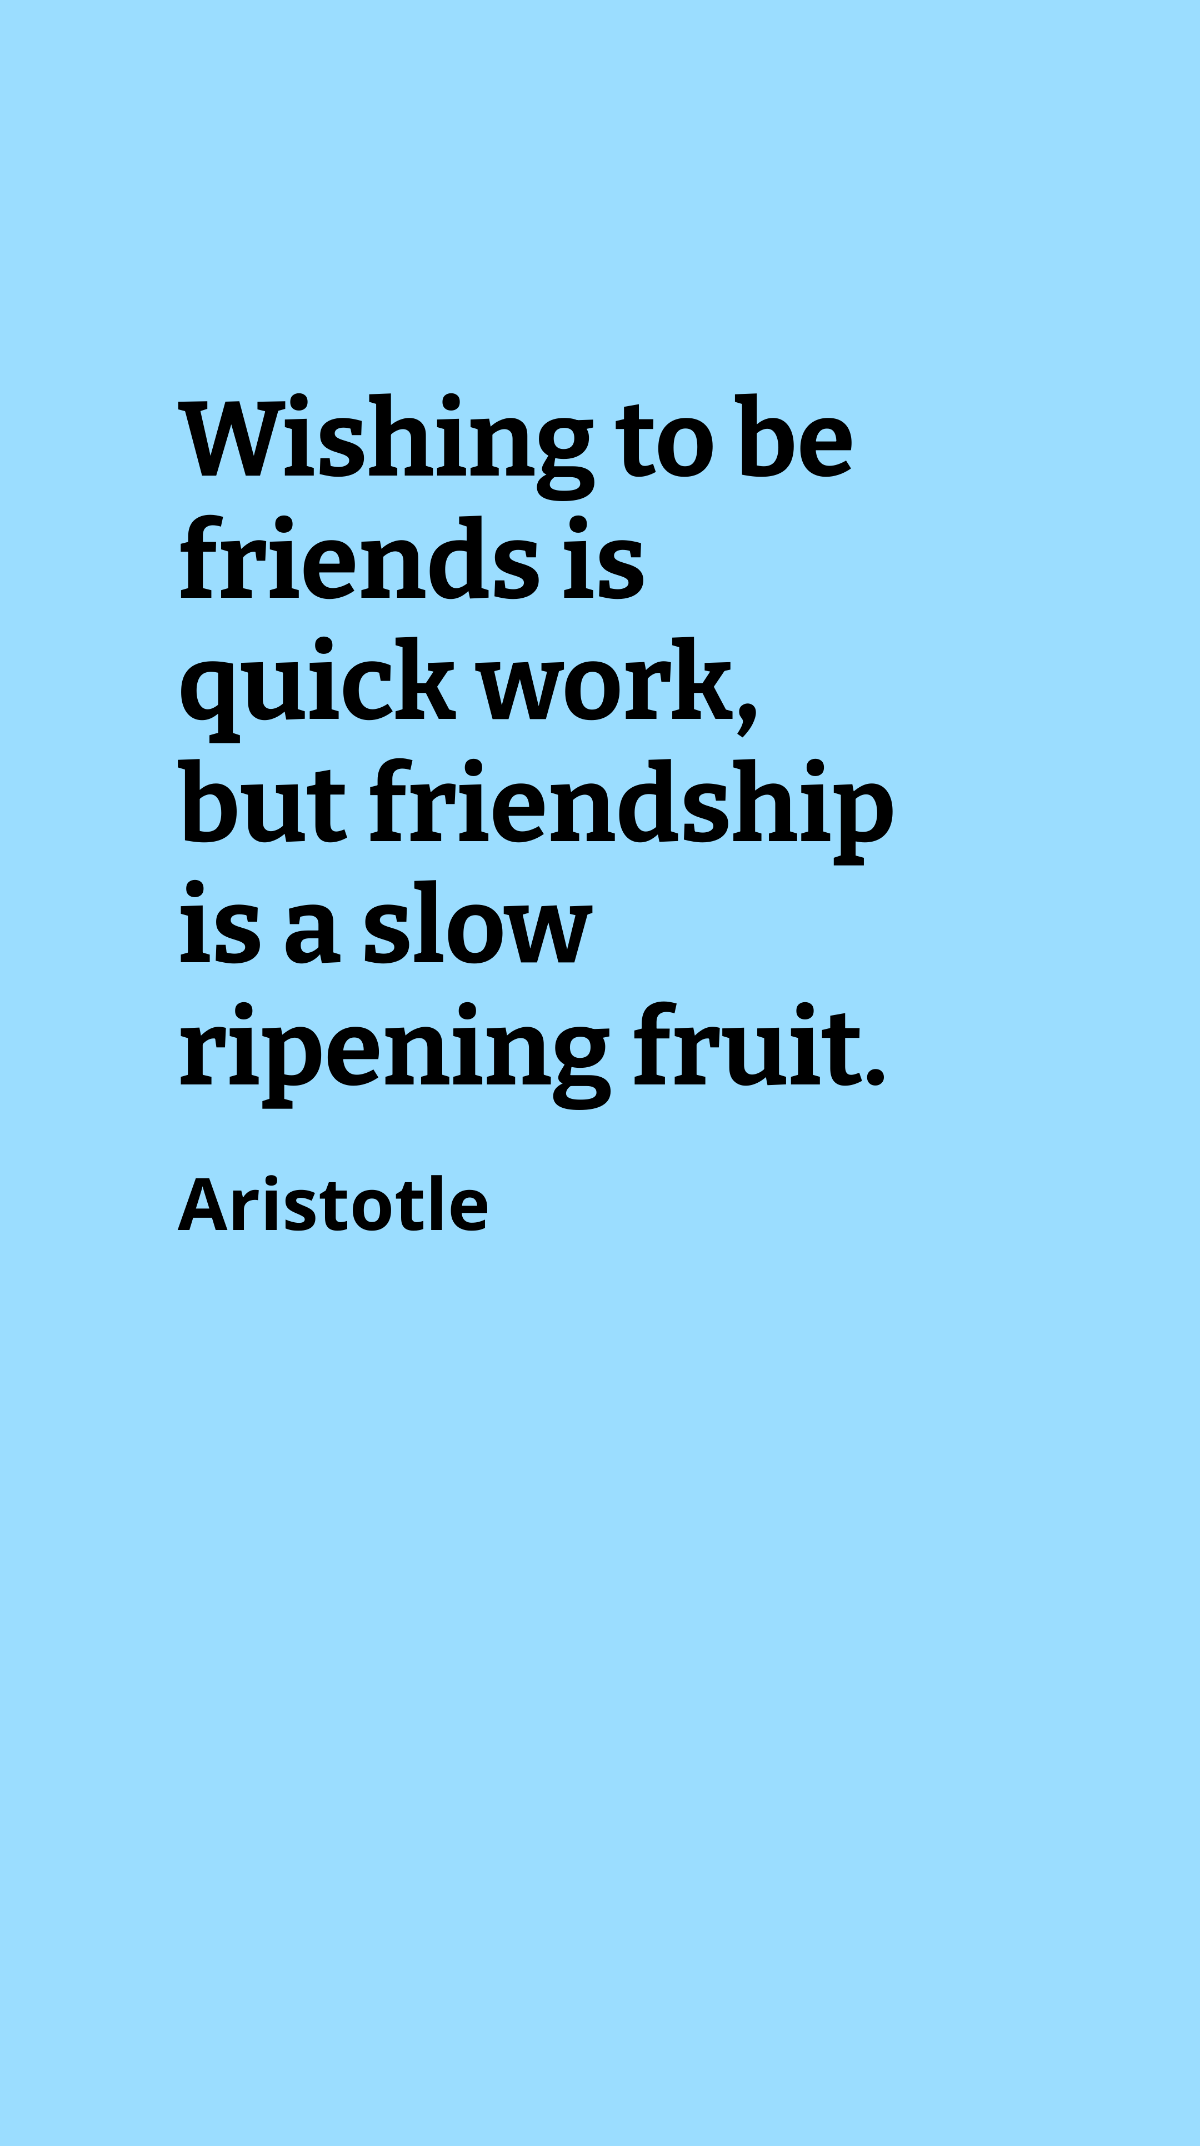 Aristotle - Wishing to be friends is quick work, but friendship is a slow ripening fruit. Template